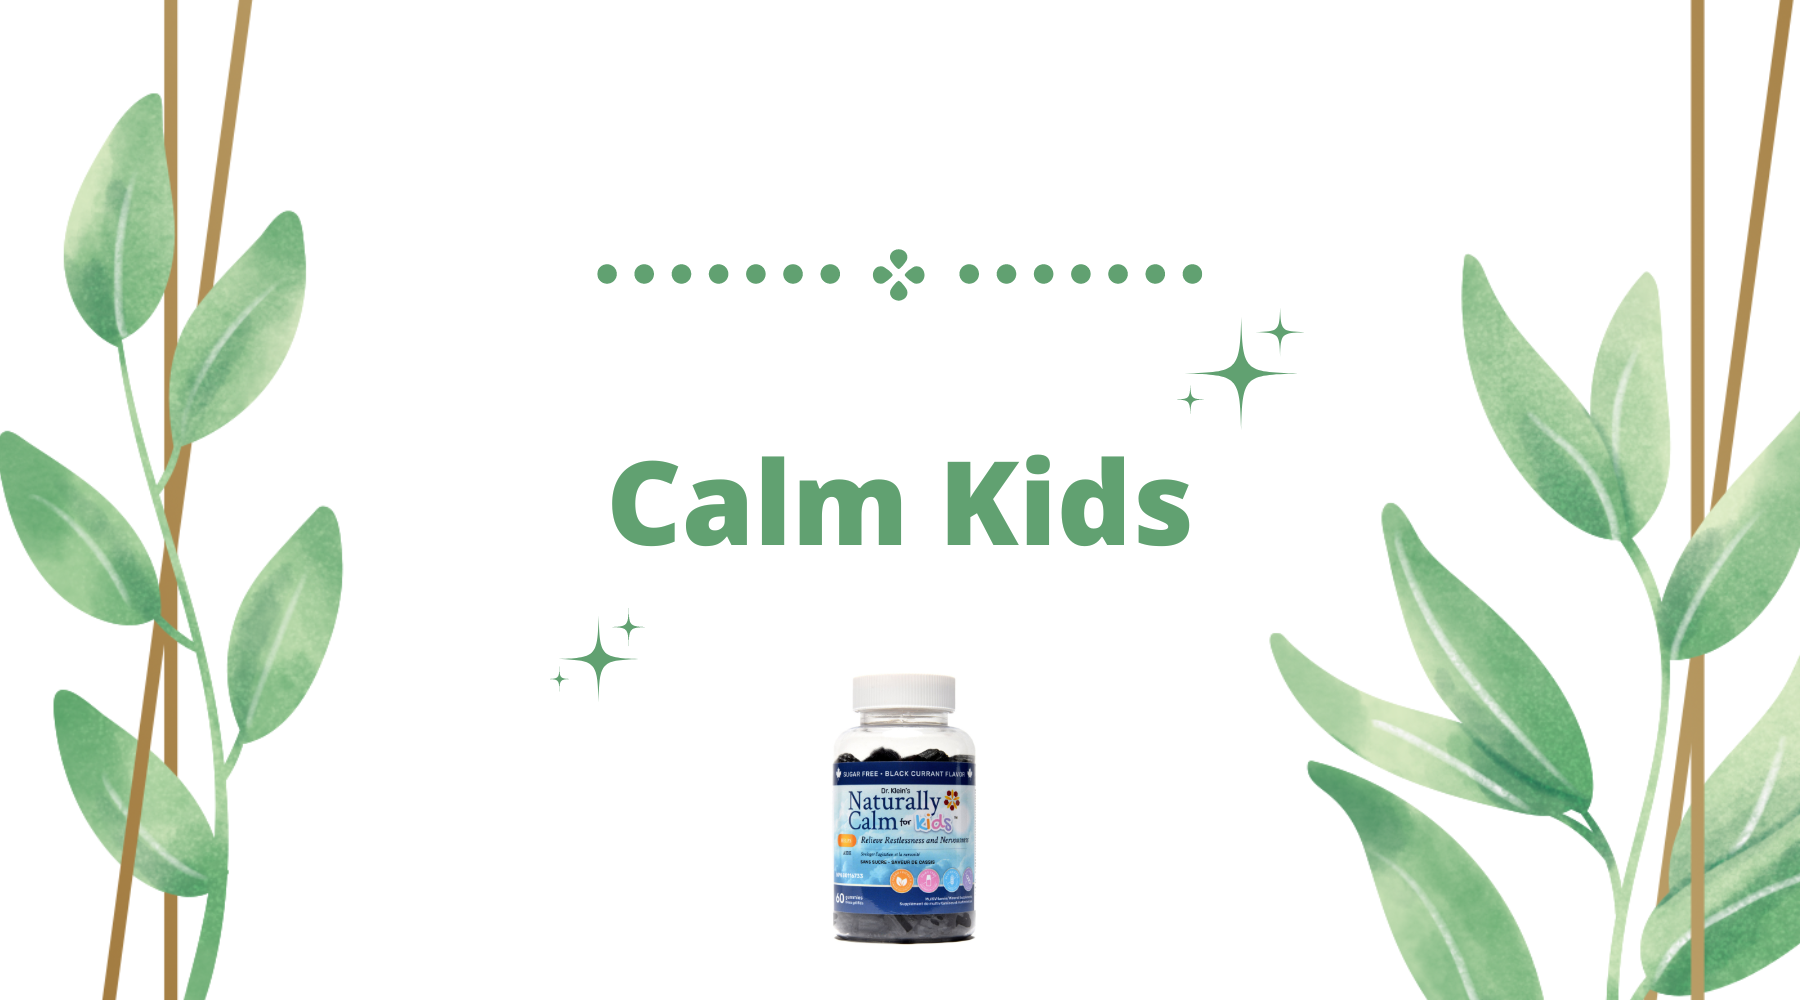 Product Spotlight: Dr. Klein's Naturally Calm Gummies For Kids - A Natural Solution to Relieve Stress & Support Focus